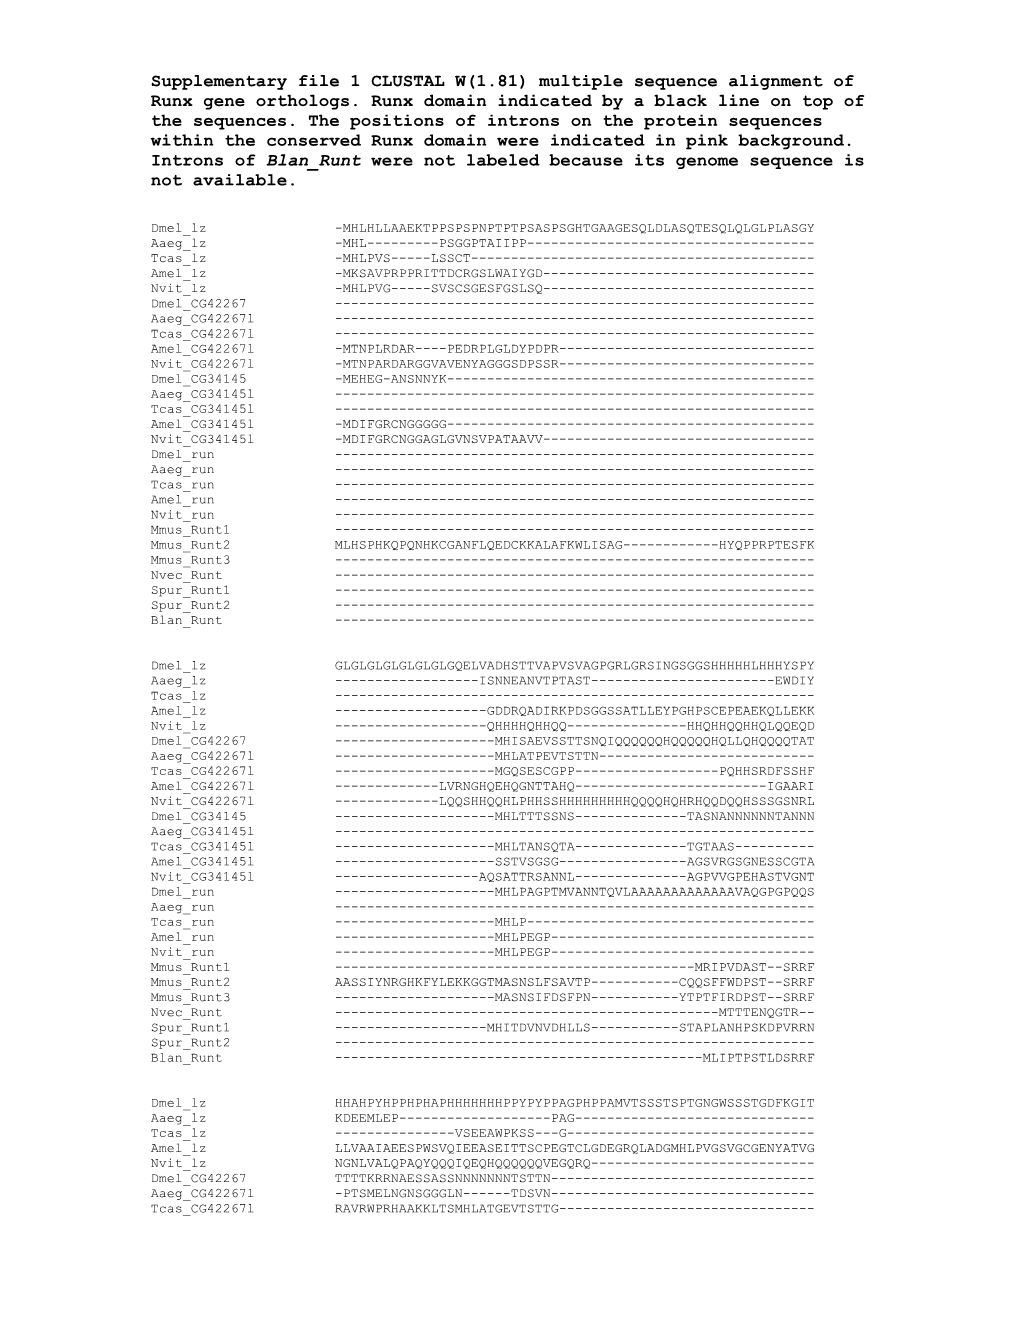 Supplementary File 1 CLUSTAL W(1.81) Multiple Sequence Alignment of Runx Gene Orthologs